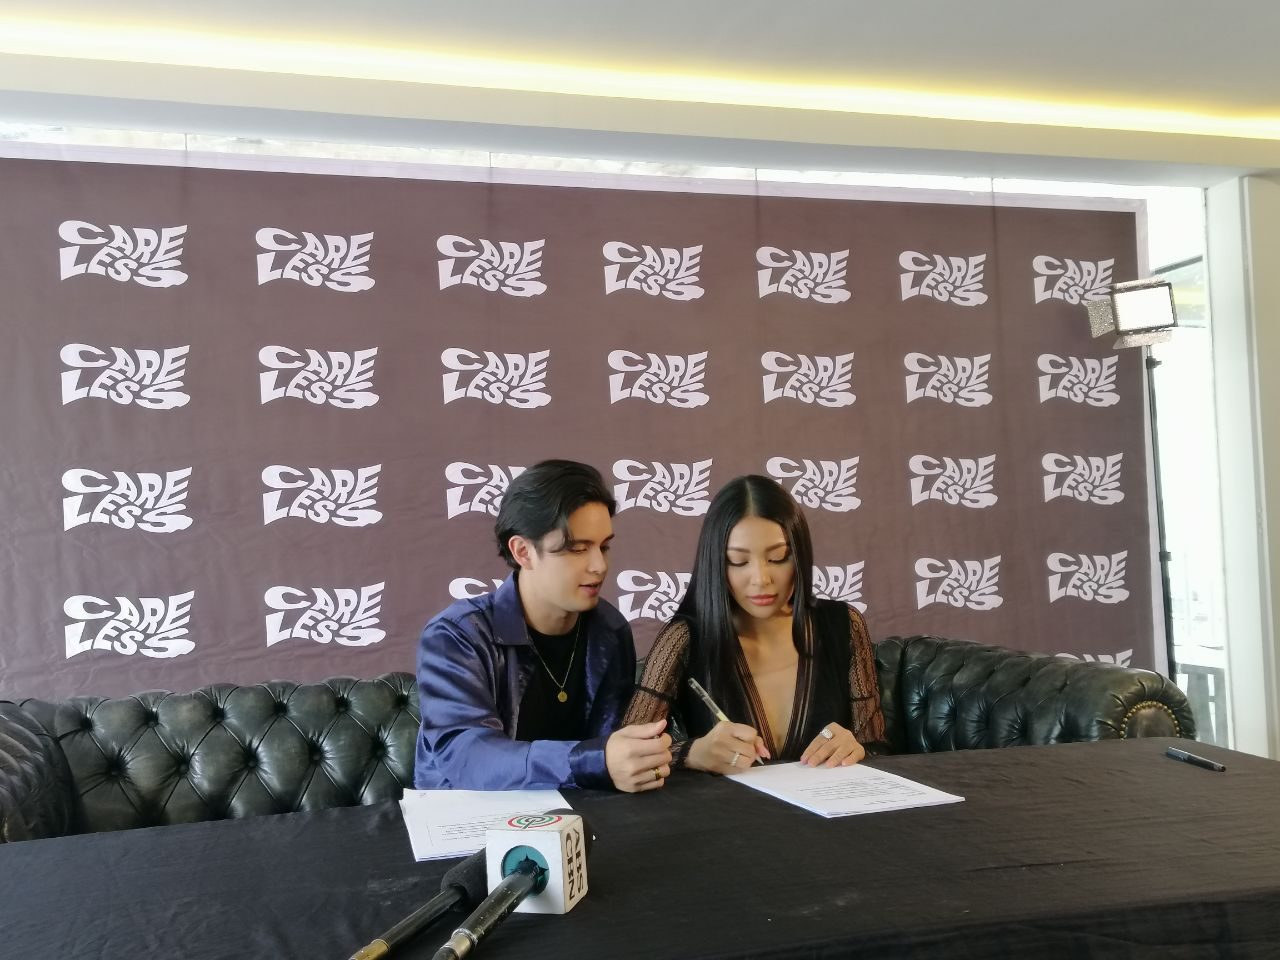 SIGNED, SEALED, DELIVERED. Nadine Lustre signs a contract under James Reid's music label, Careless. File photo by Amanda Lago/Rappler 